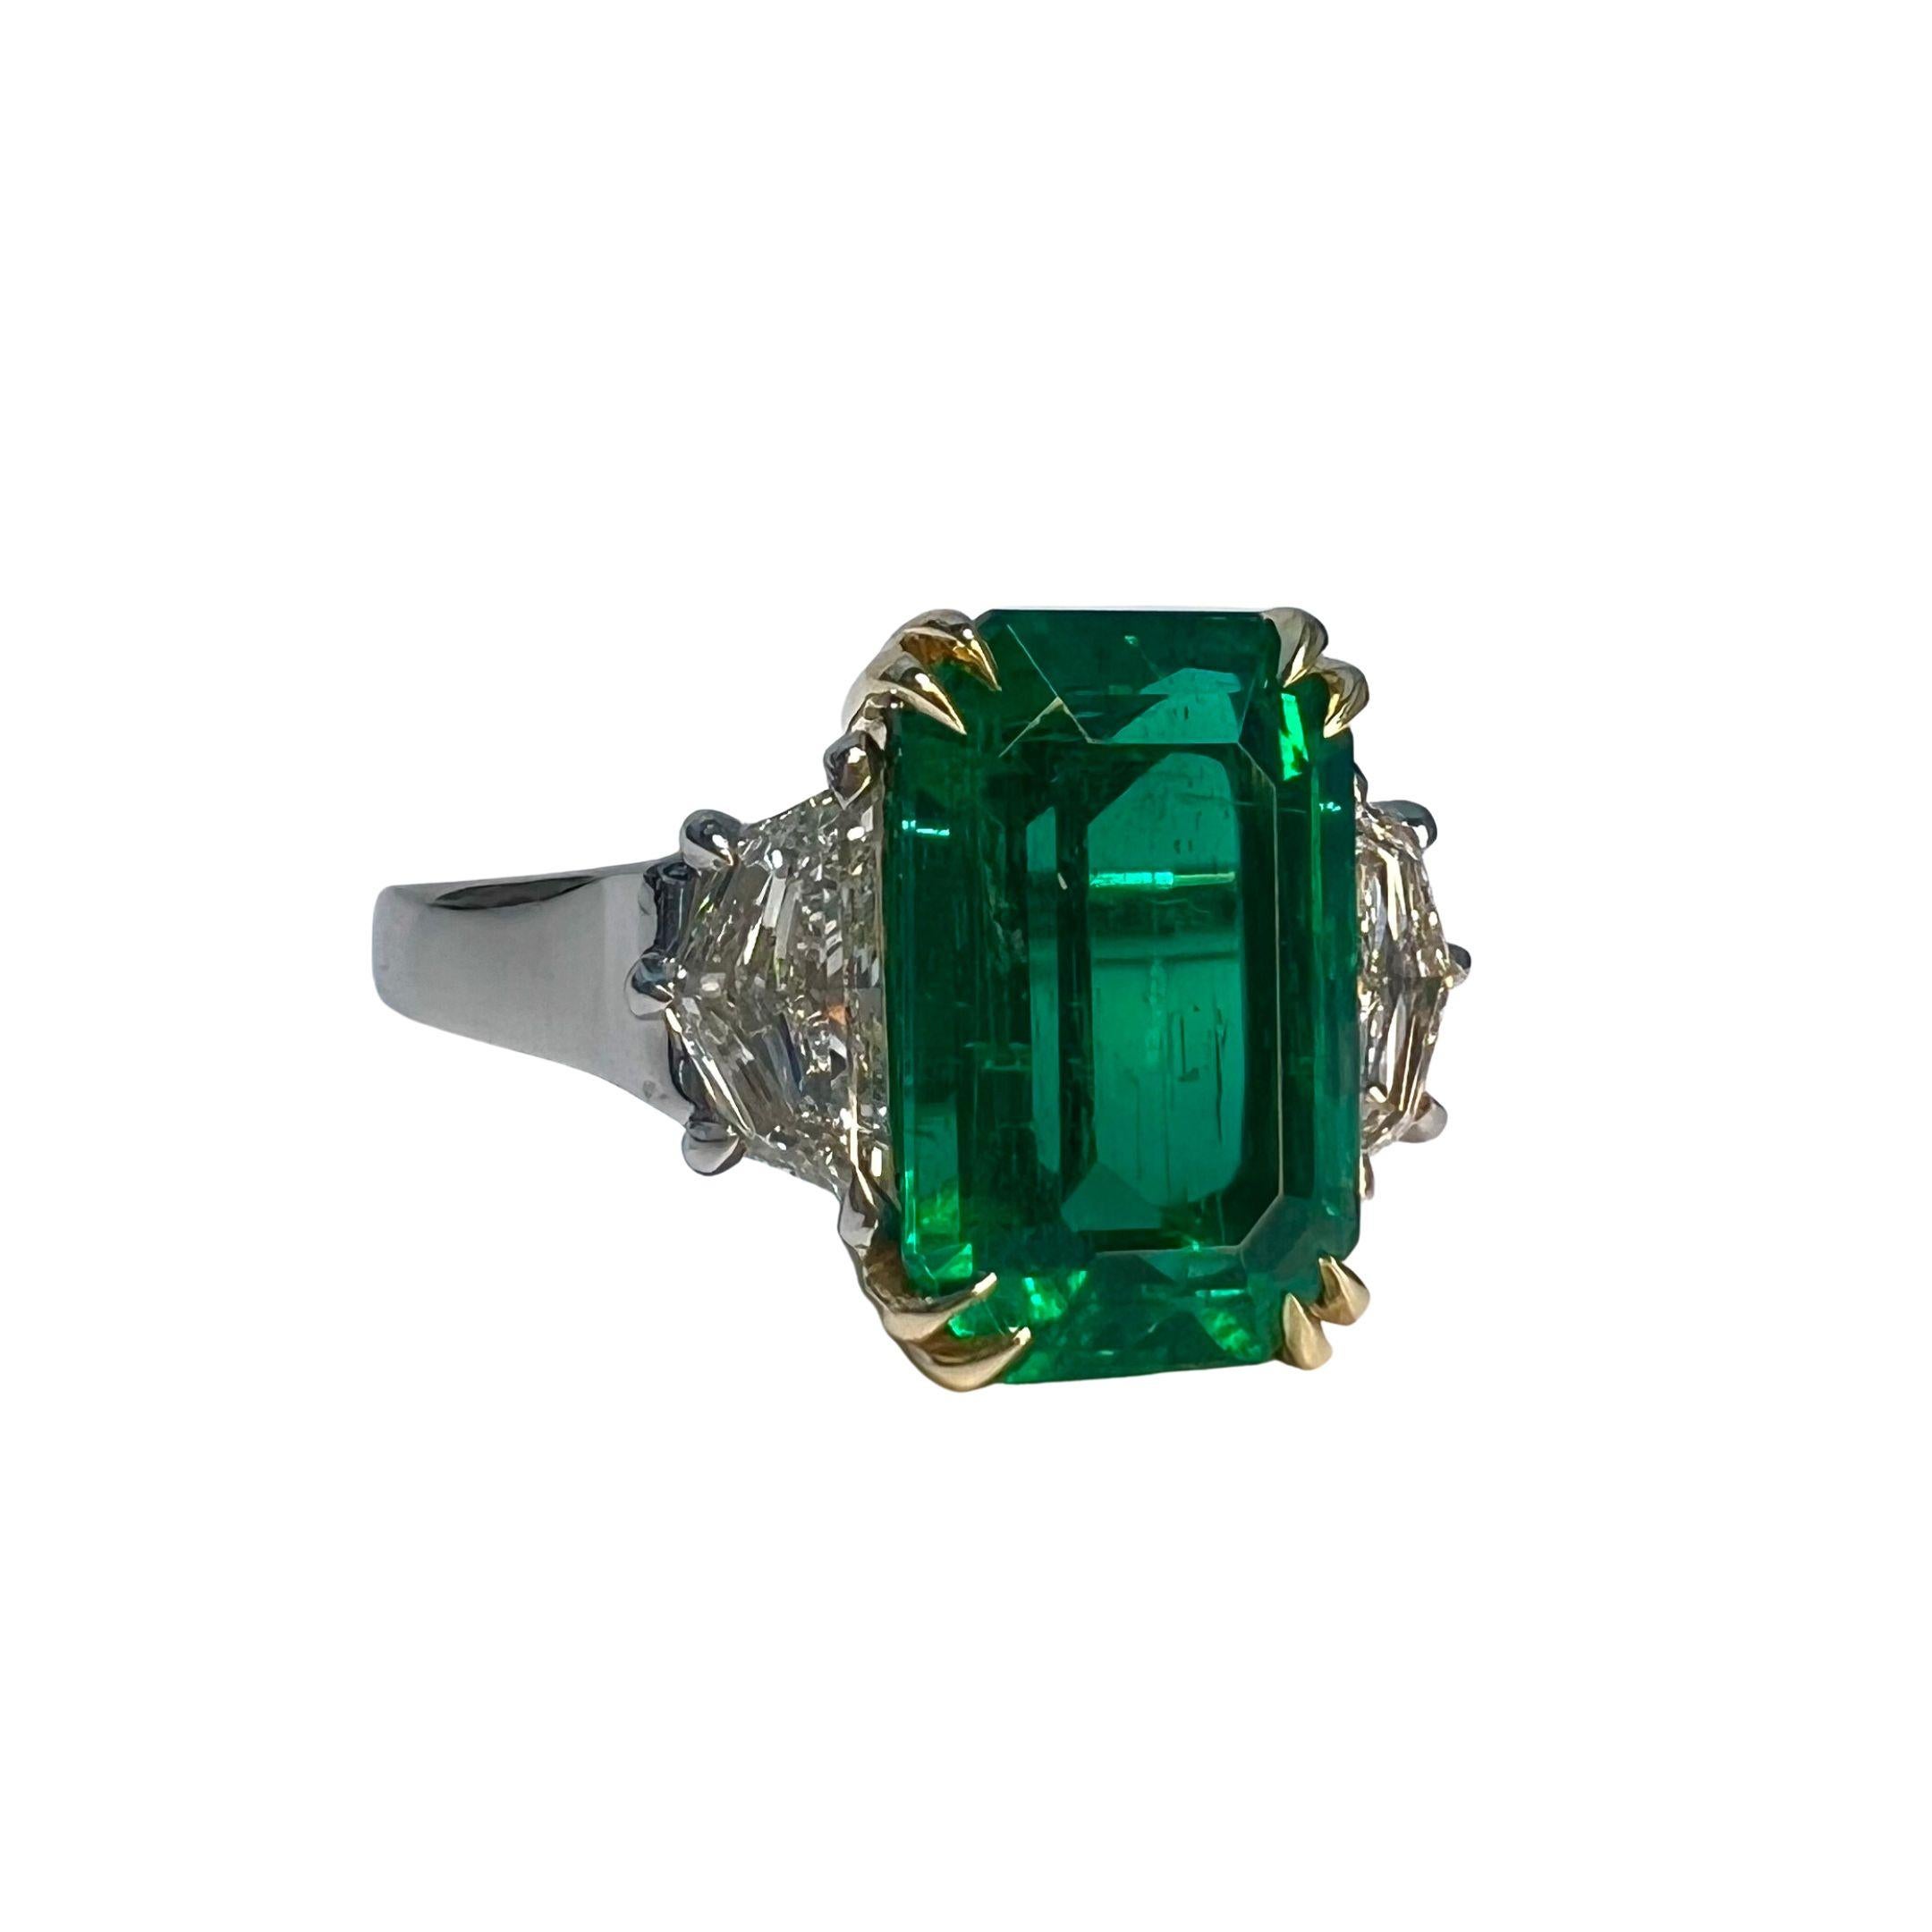 Emerald Weight: 4.23 CTs
Measurements: 12.38 x 7.95 x 5.93 mm
Diamond Weight: 0.84 CTs (G-VS)
Metal: Platinum/18K Yellow Gold 
Ring Size: 7
Shape: Emerald-Cut
Color: Green
Hardness: 7.5-8
Birthstone: May
CD Certified: 1009
Product ID: